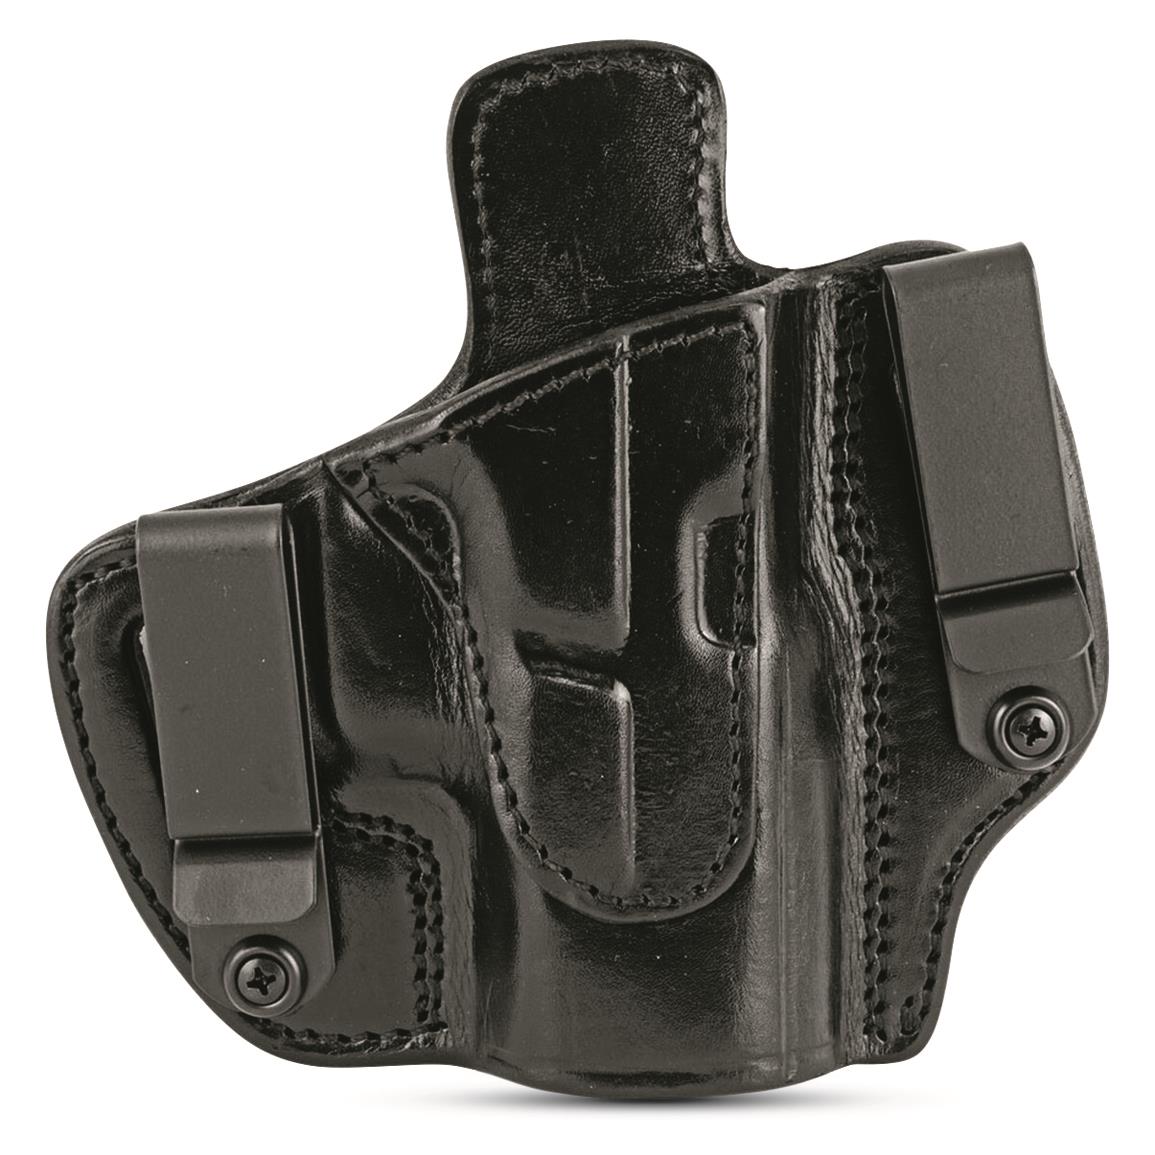 Tagua Crusader Black Leather OWB/IWB Holster, Smith & Wesson M&P SHIELD/SIG SAUER P365